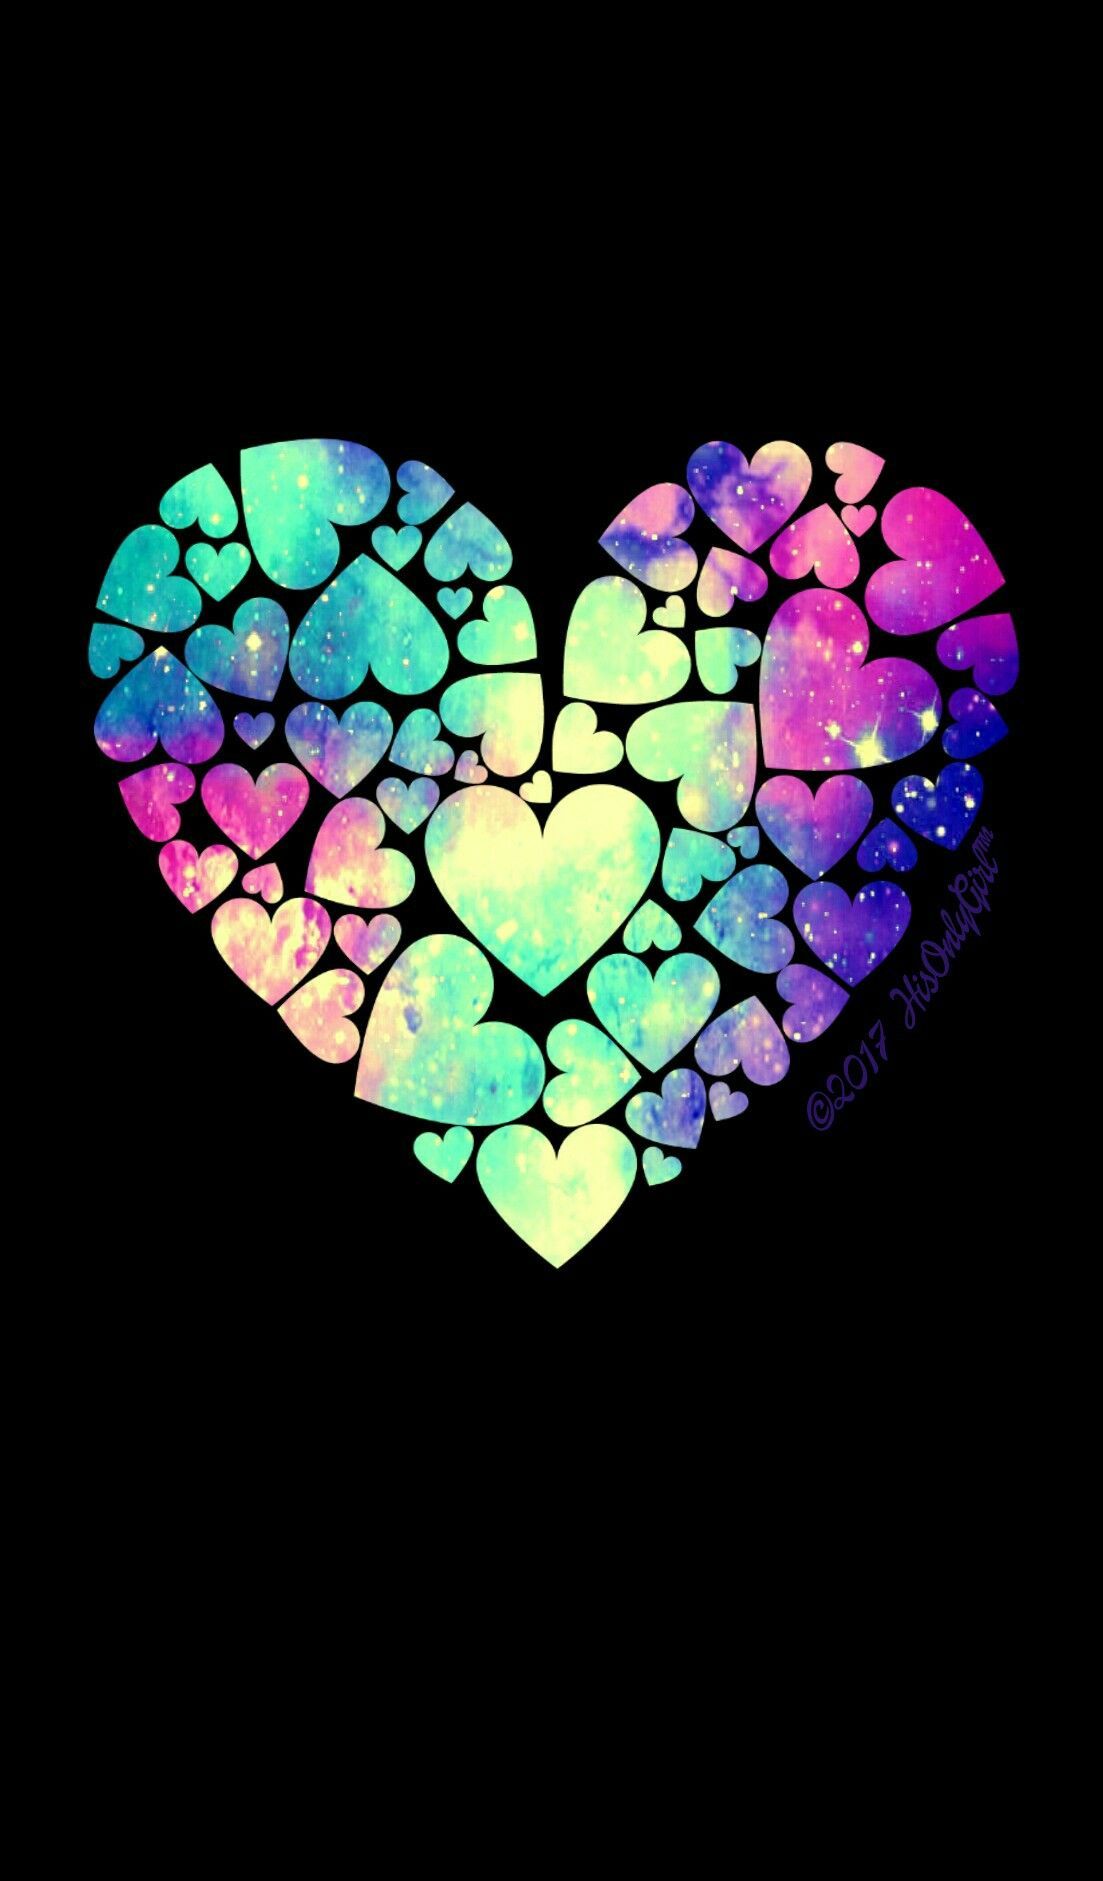 Galaxy hearts wallpaper I created for the app CocoPPa!. Heart wallpaper, Colorful heart, Wallpaper